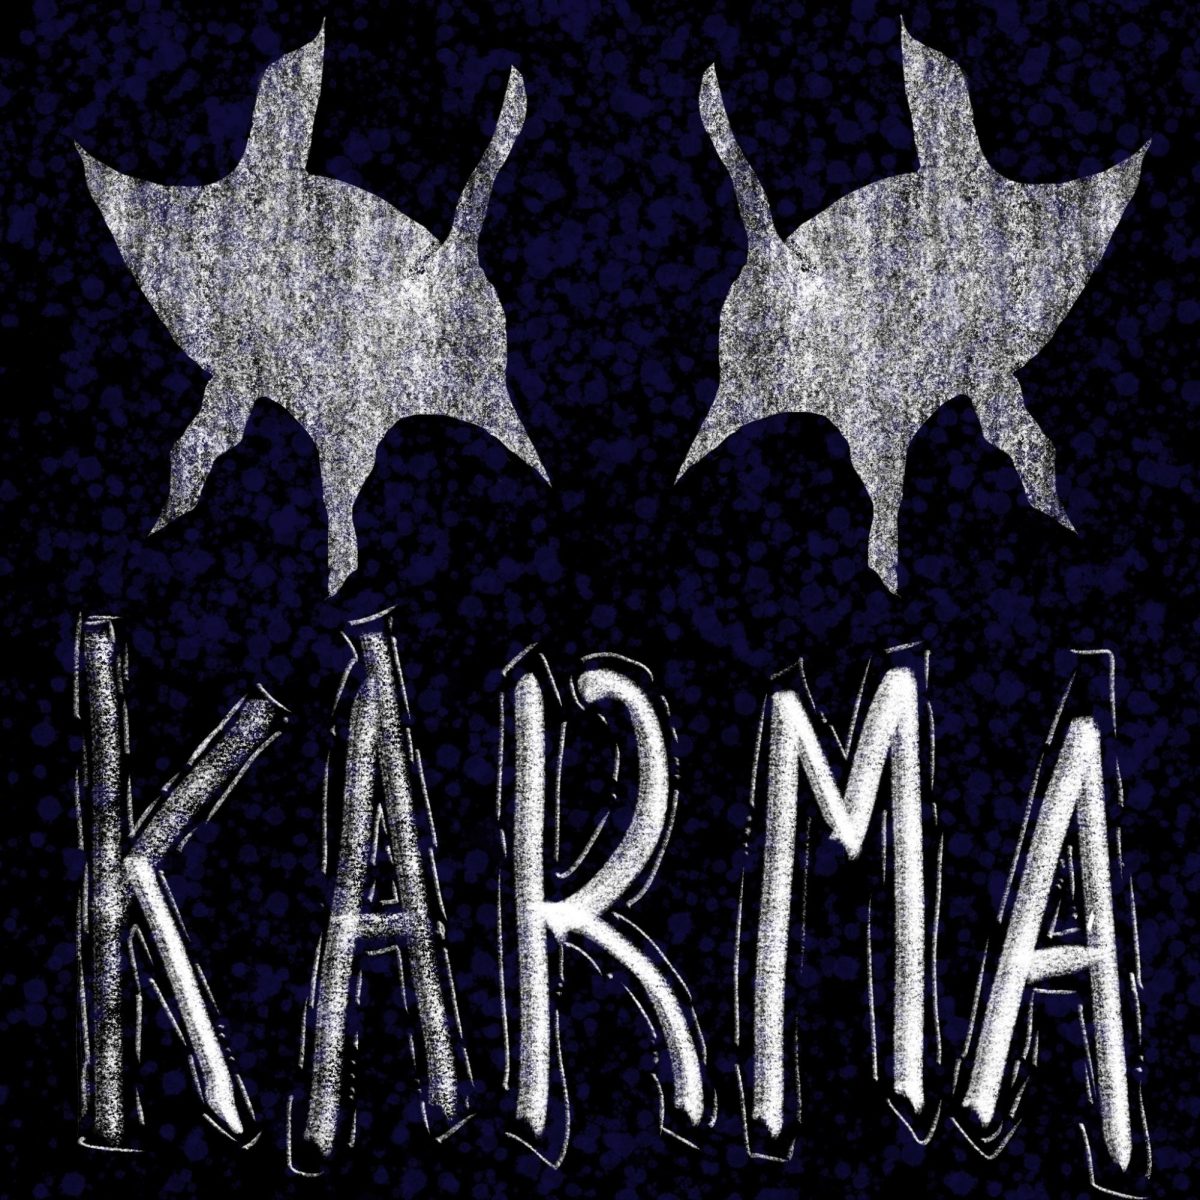 Karma+is+Jojo+Siwas+new+single+representing+her+new+era+as+she+tries+to+break+away+from+her+previous+persona.